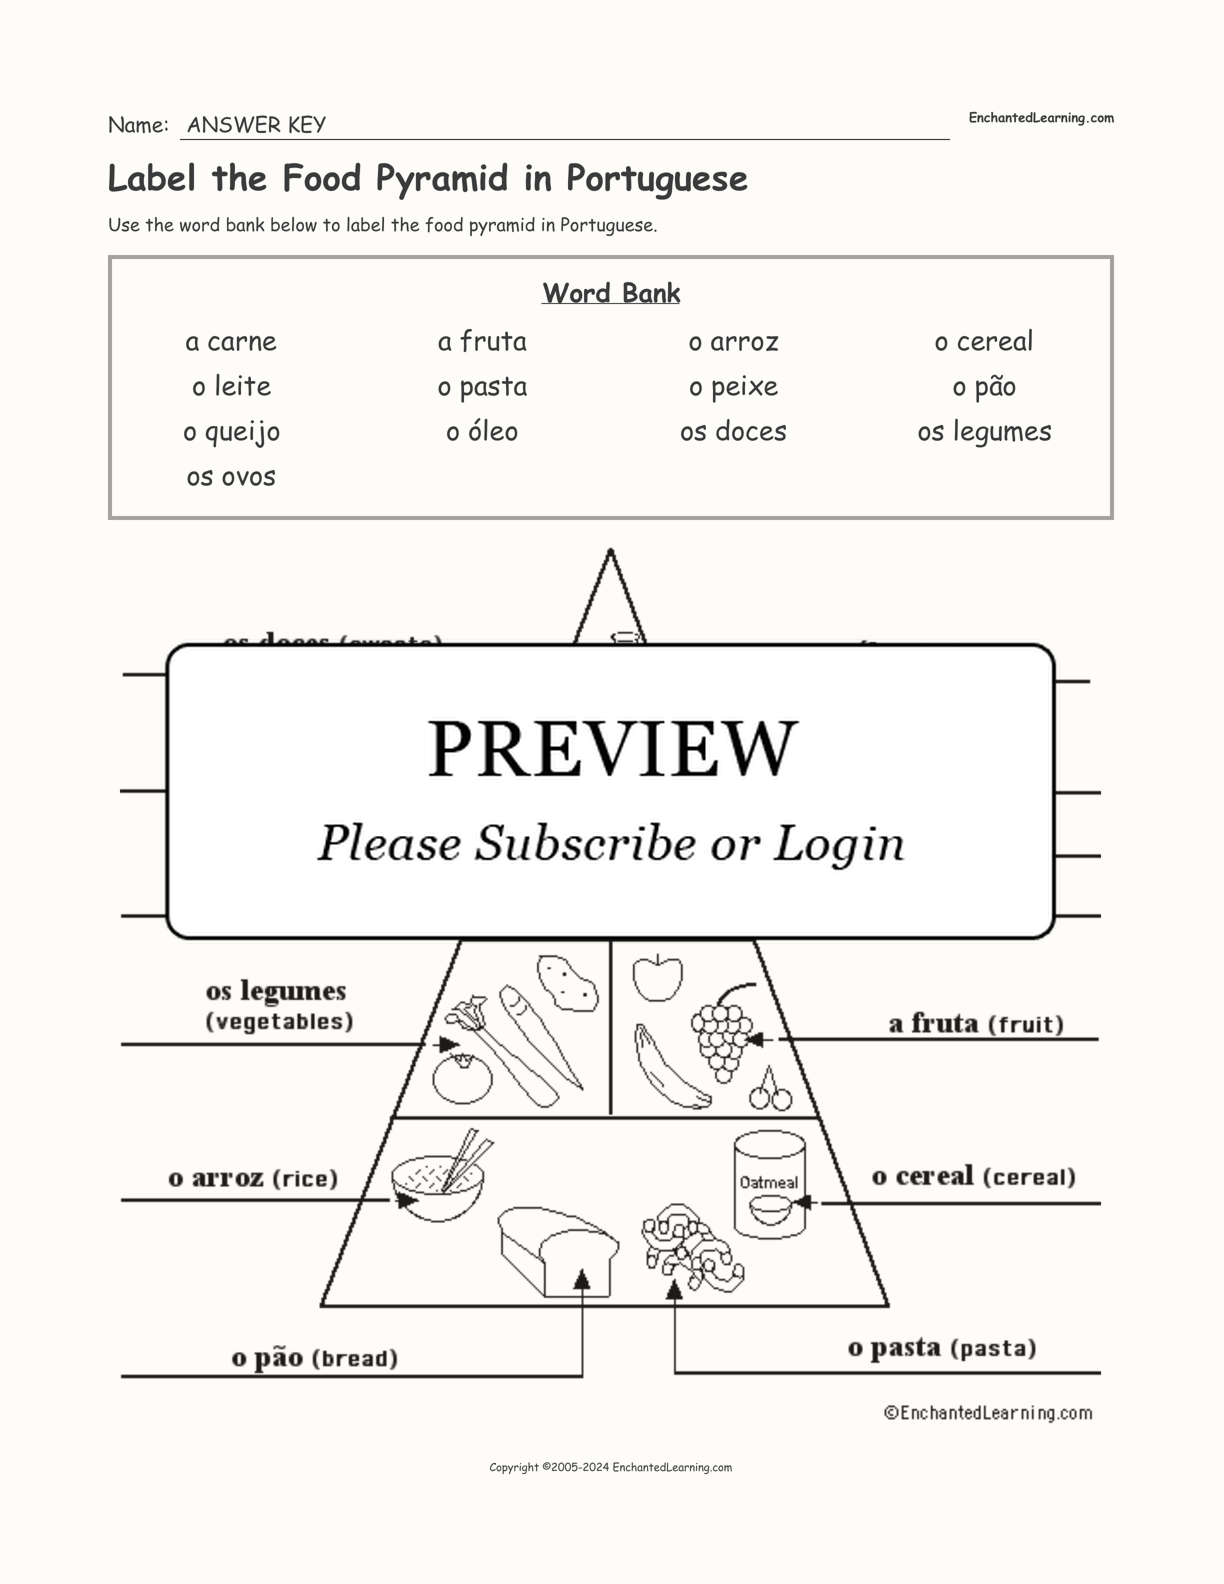 Label the Food Pyramid in Portuguese interactive worksheet page 2